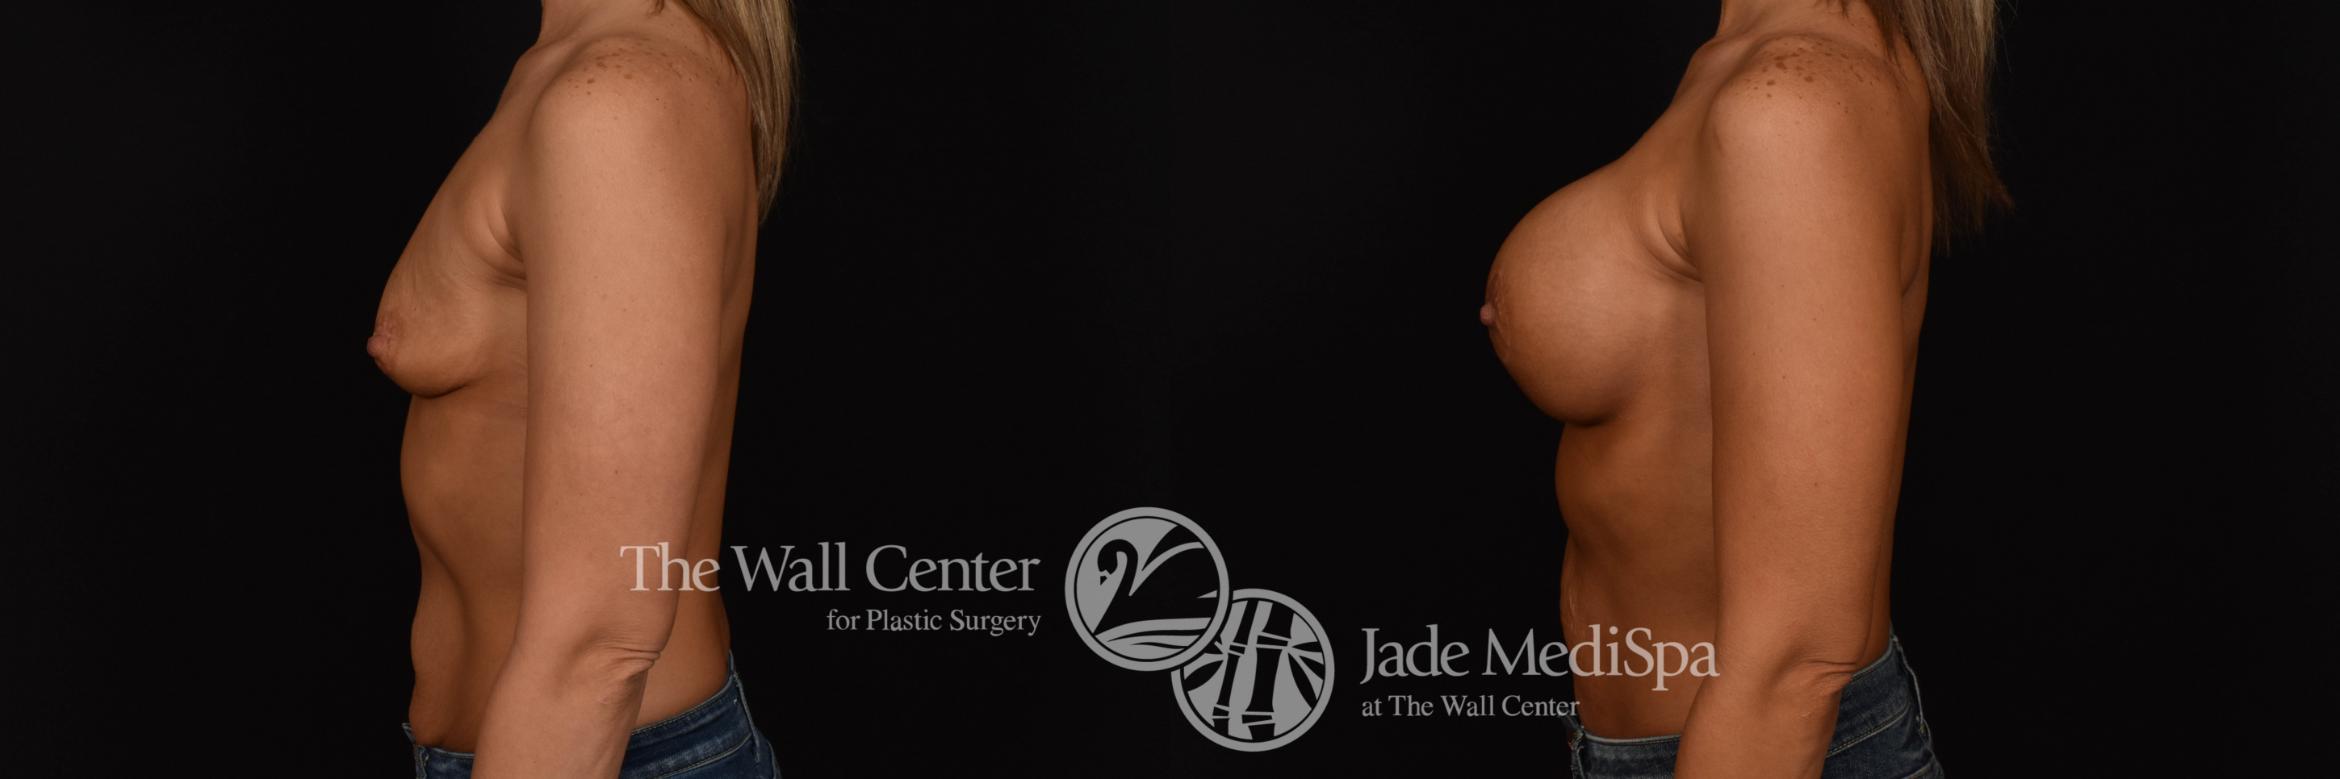 Breast Augmentation with Lift Left Side Photo, Shreveport, Louisiana, The Wall Center for Plastic Surgery, Case 967